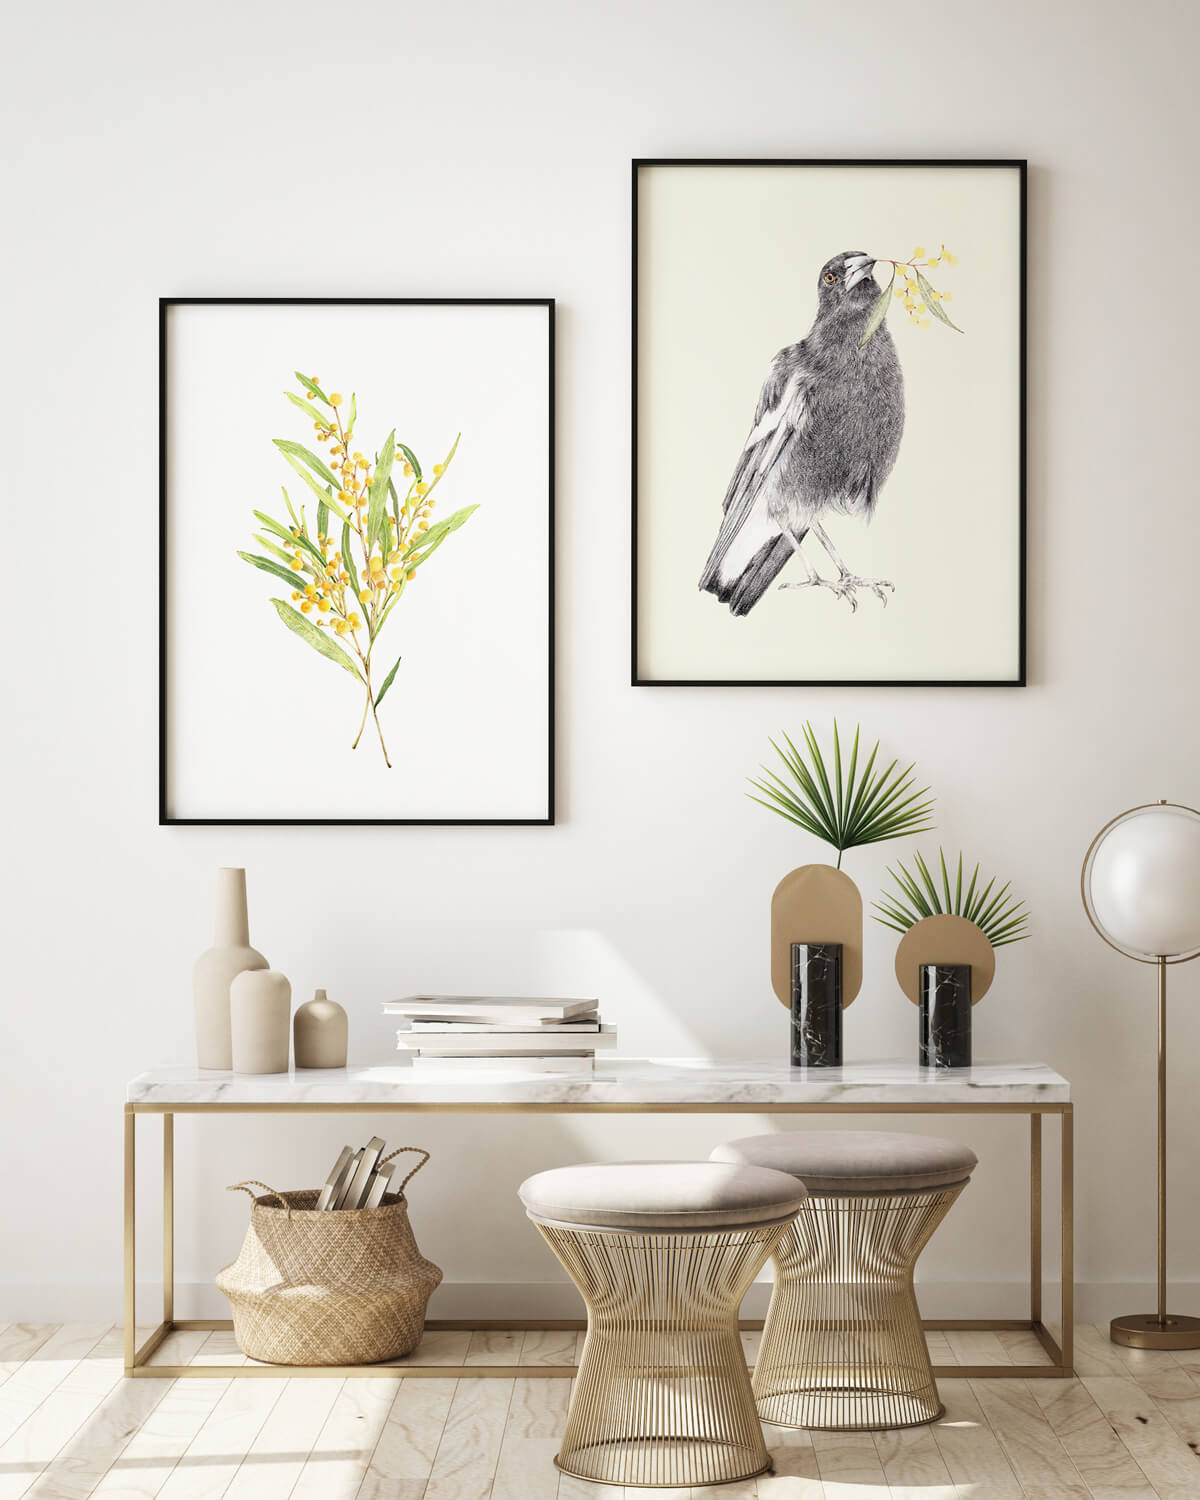 Golden Wattle and Magpie Art Print with Frames made in Australia by Artist Carmen Hui